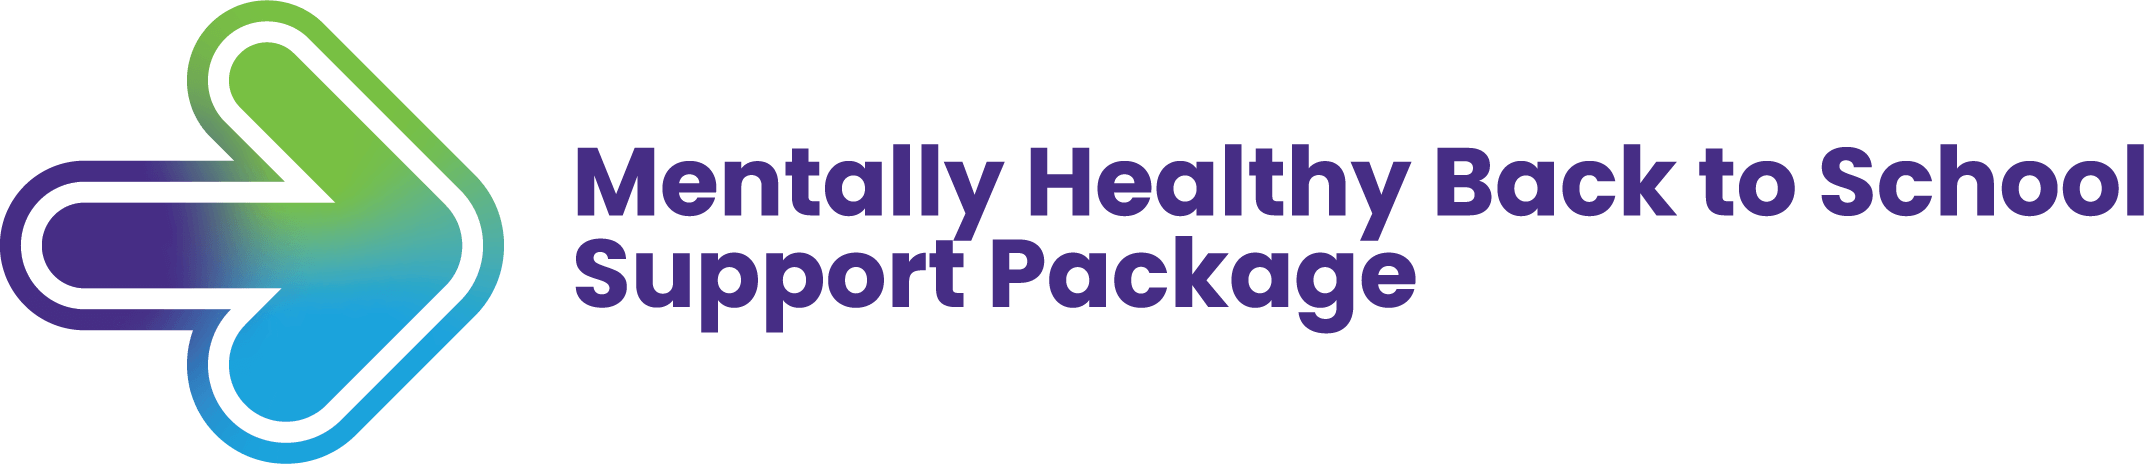 Mentally Healthy Back to School Support Package logo